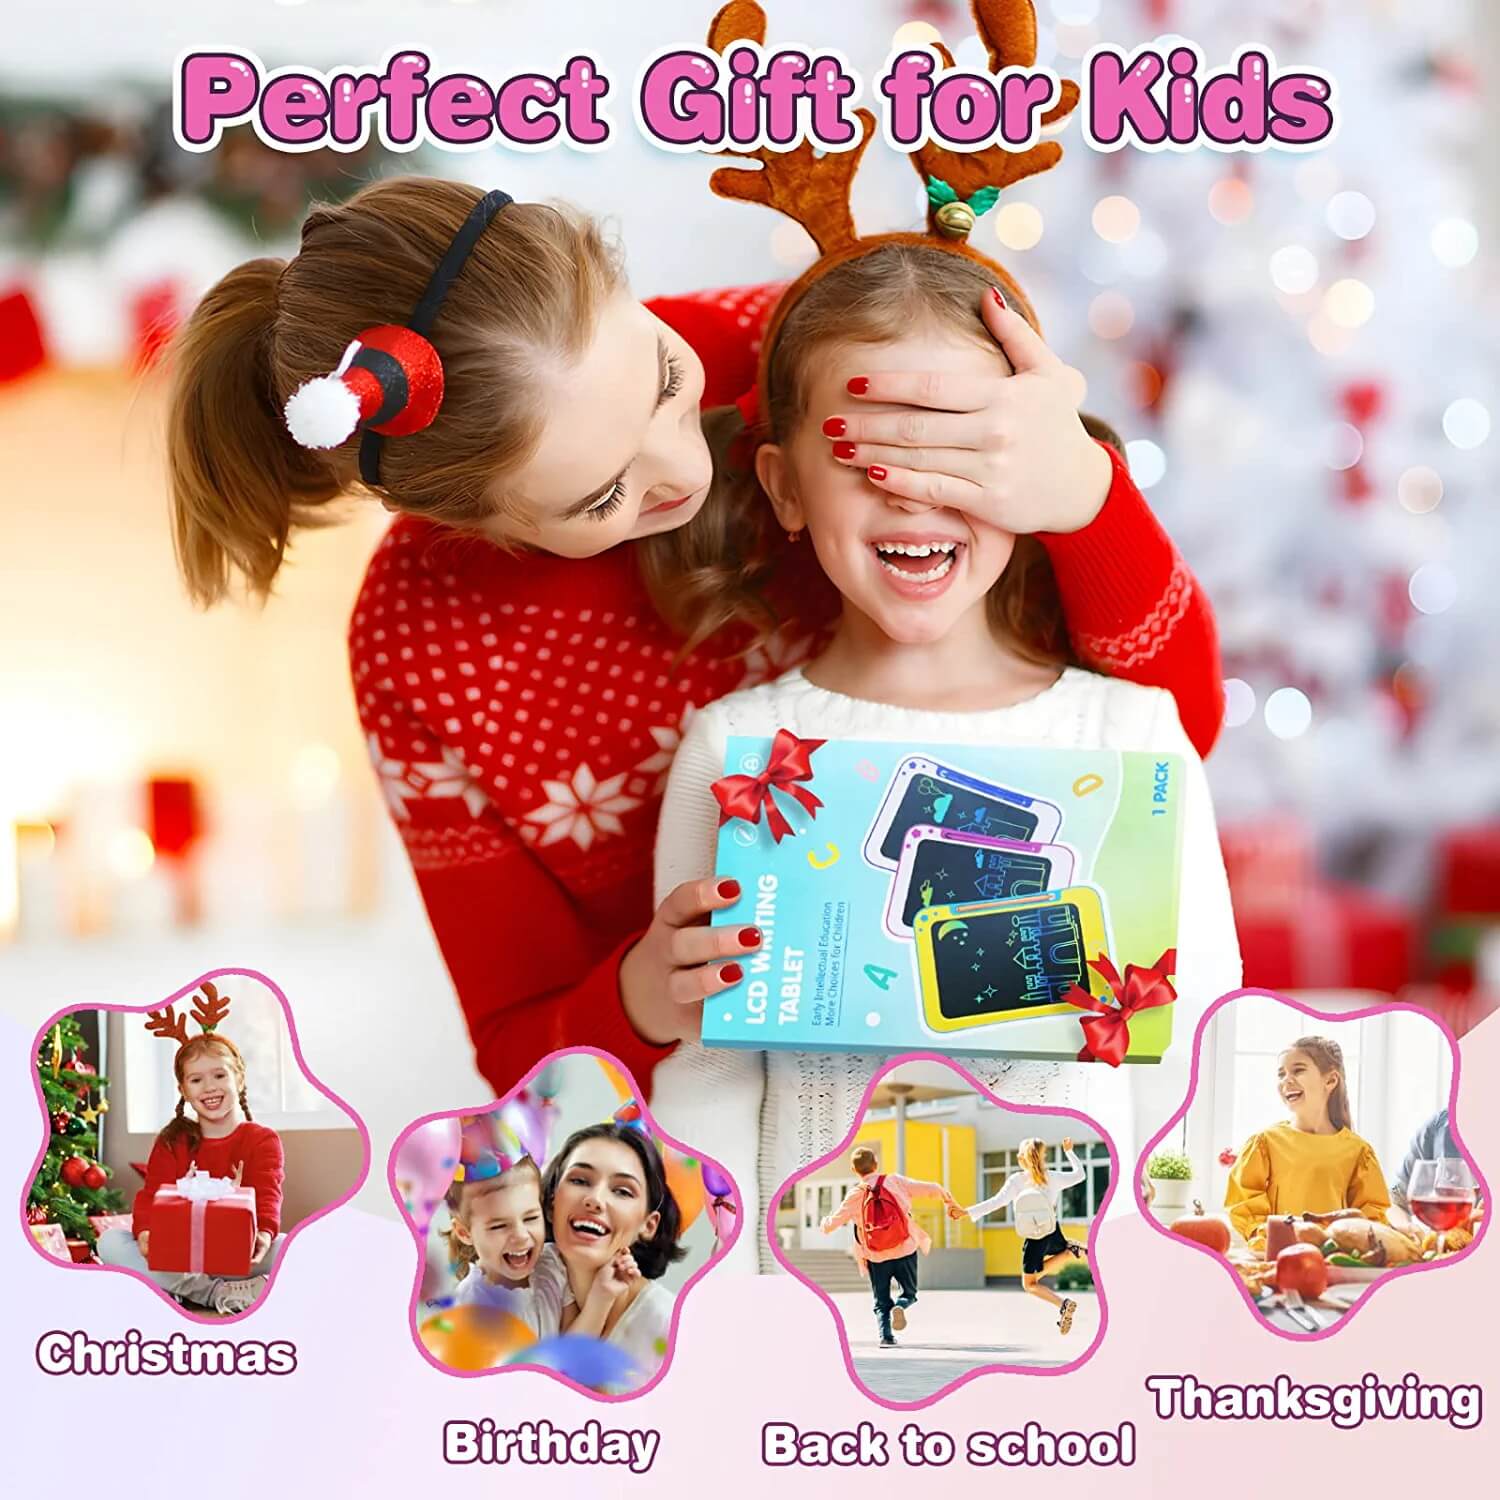 TEKFUN LCD Writing Tablet for Kids, Decorate Your Own Doodle Board with Cute Stickers, 8.5inch Colorful Drawing Board - Mytekfun